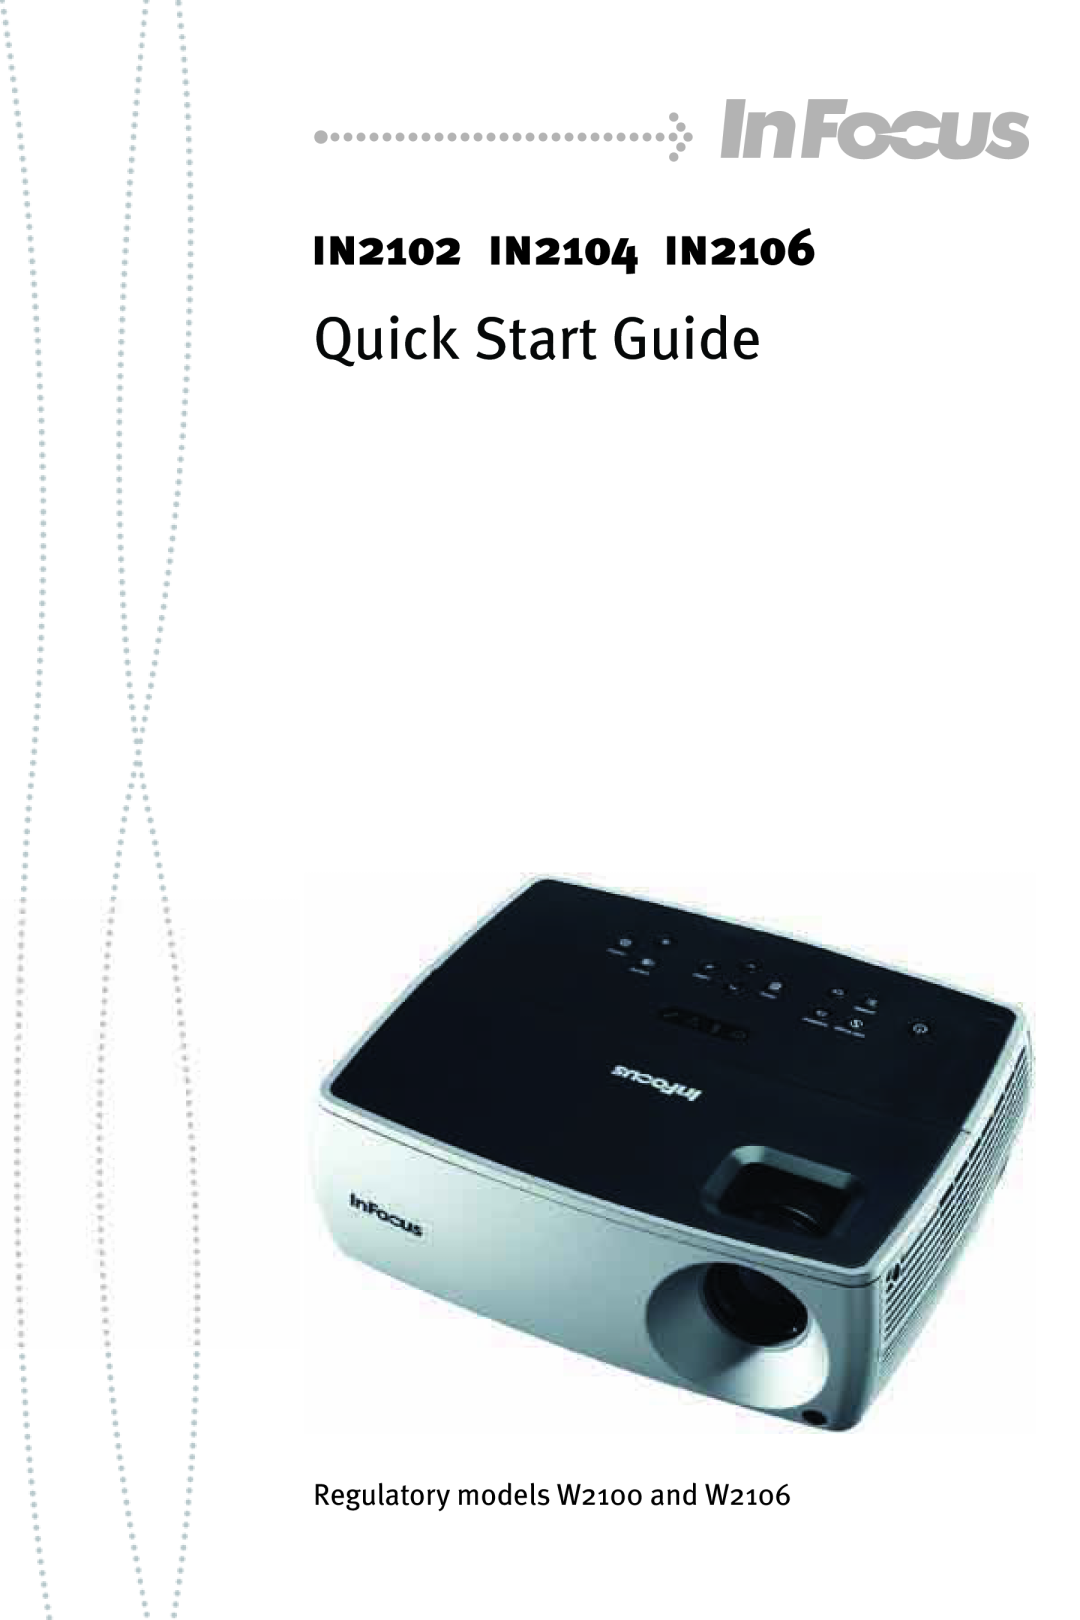 InFocus quick start Quick Start Guide, IN2102 IN2104 IN2106, Regulatory models W2100 and W2106 